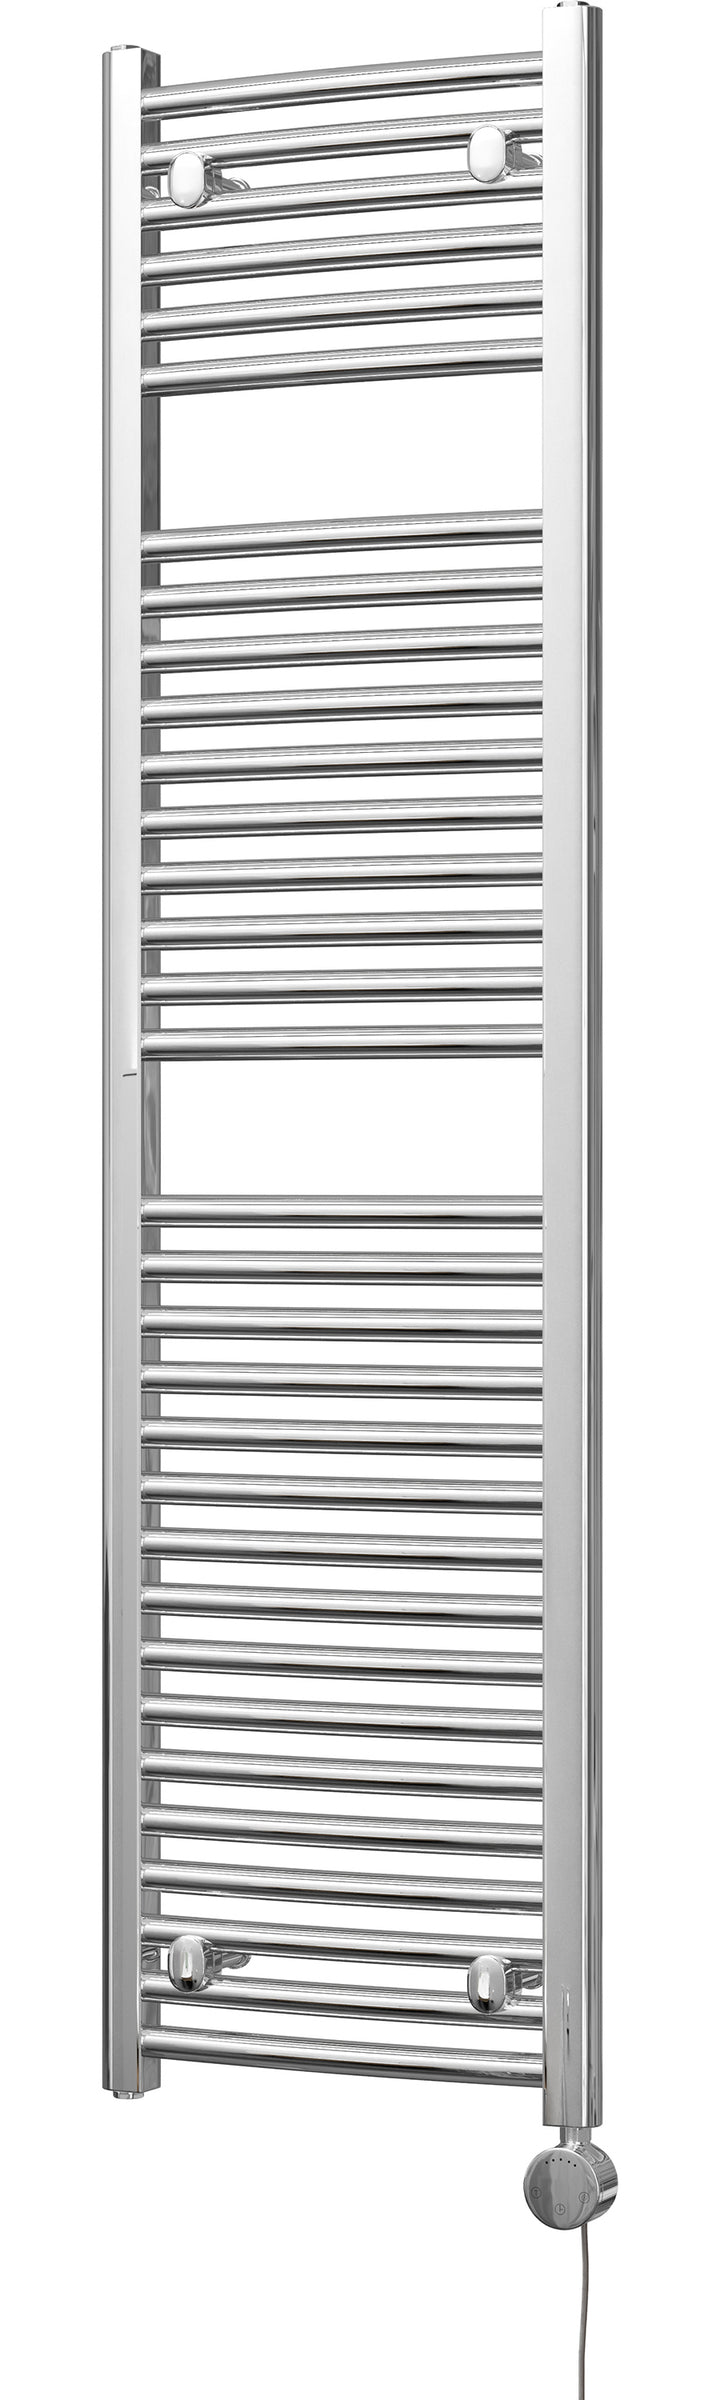 Roma - Chrome Electric Towel Rail H1512mm x W400mm Curved 300w Thermostatic